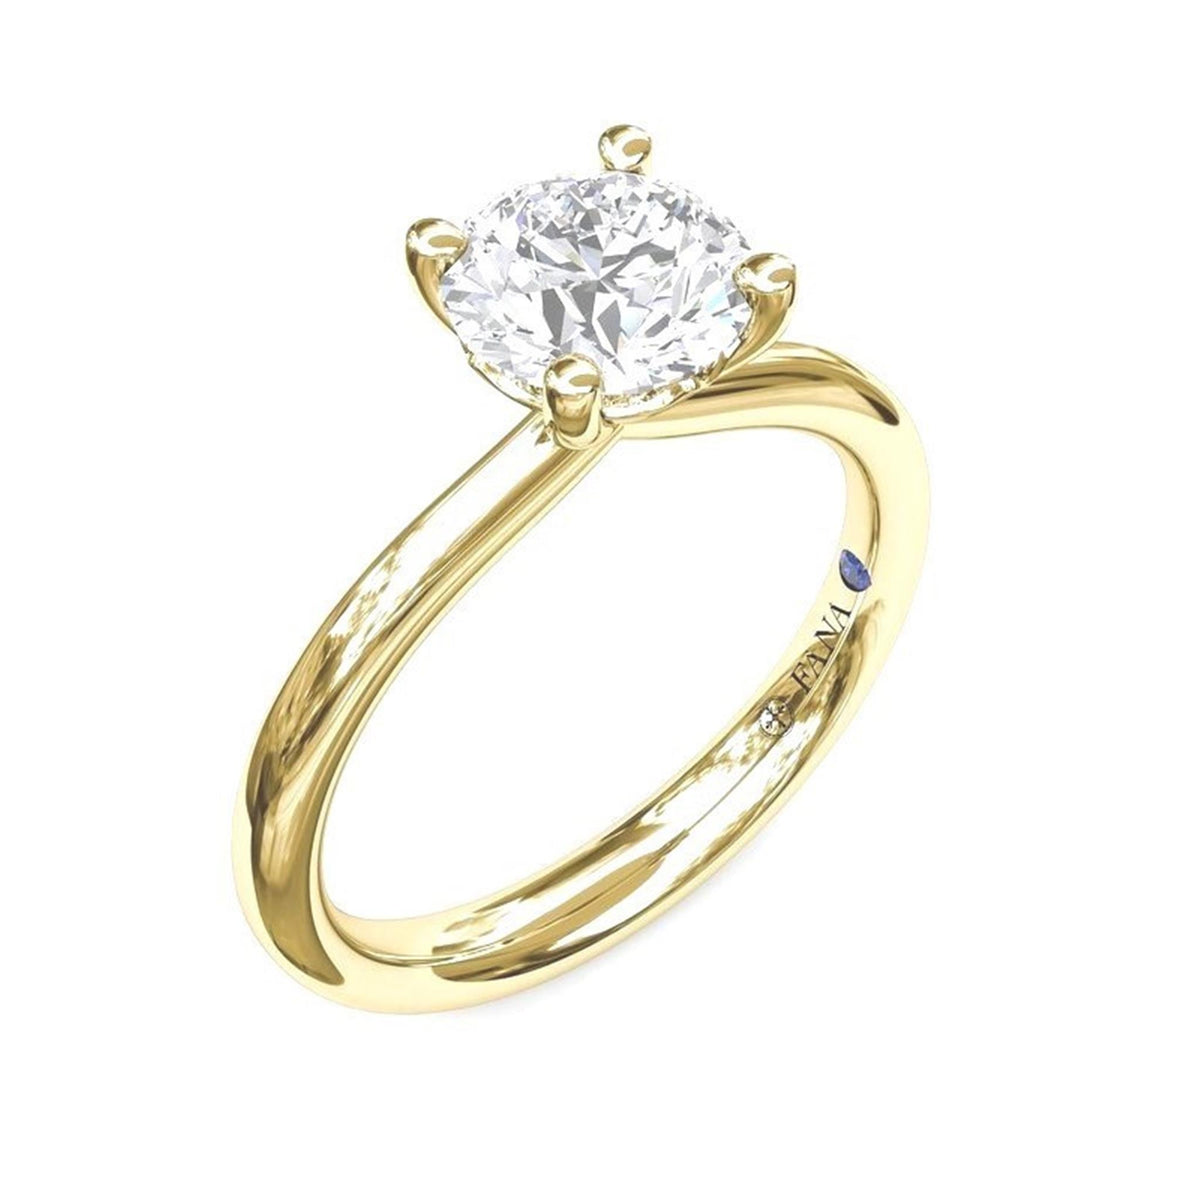 14Kt Yellow Gold Solitaire Ring With ct Natural Center Diamond